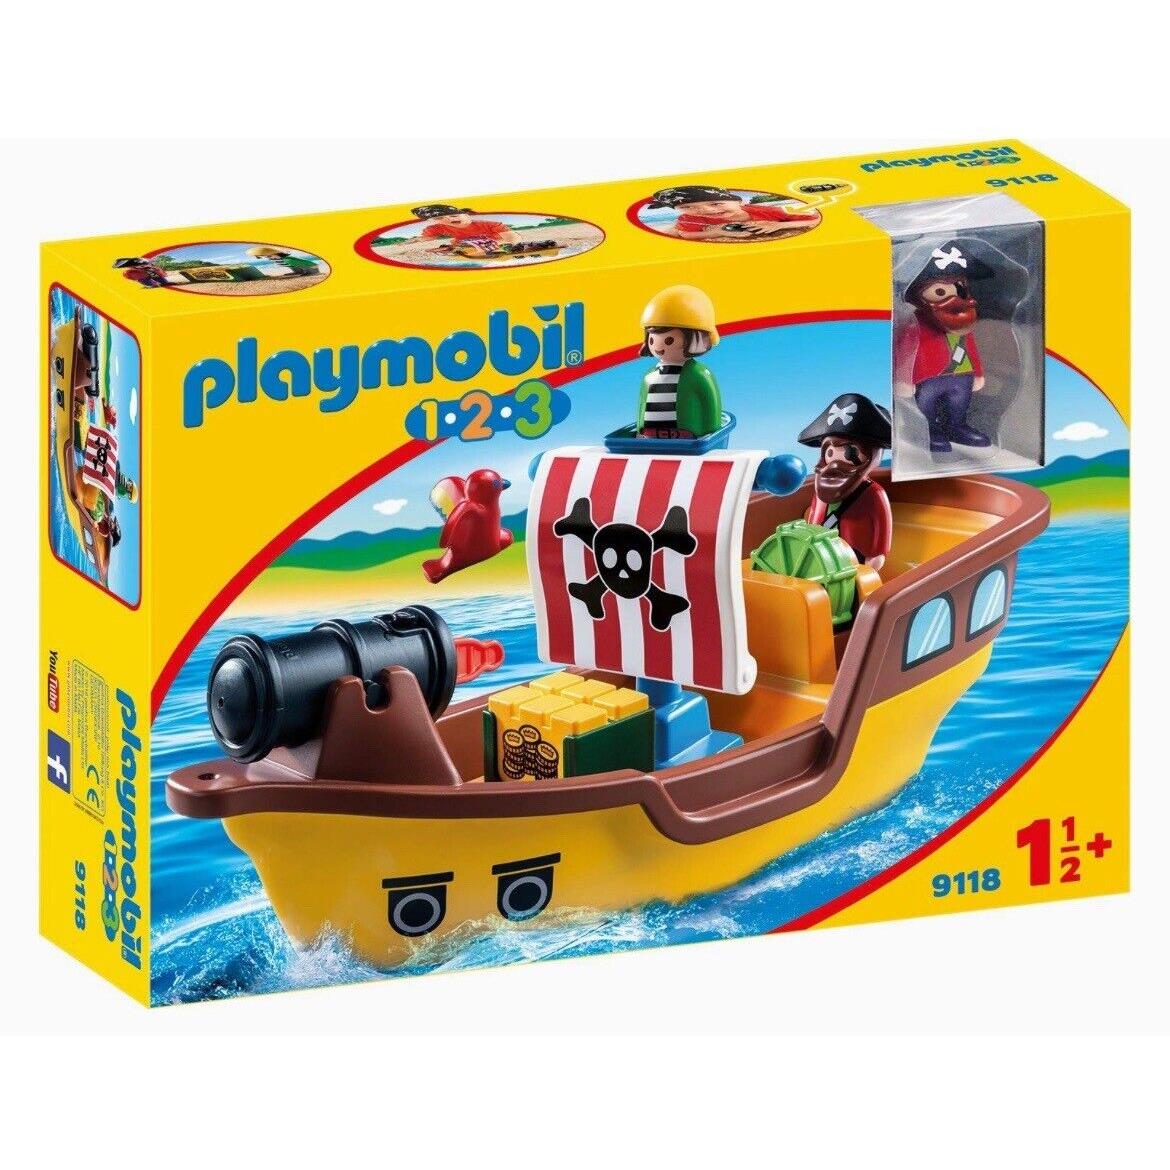 Playmobil 9118 1.2.3 Pirate Ship For Children Ages 1.5+ U.s. Seller